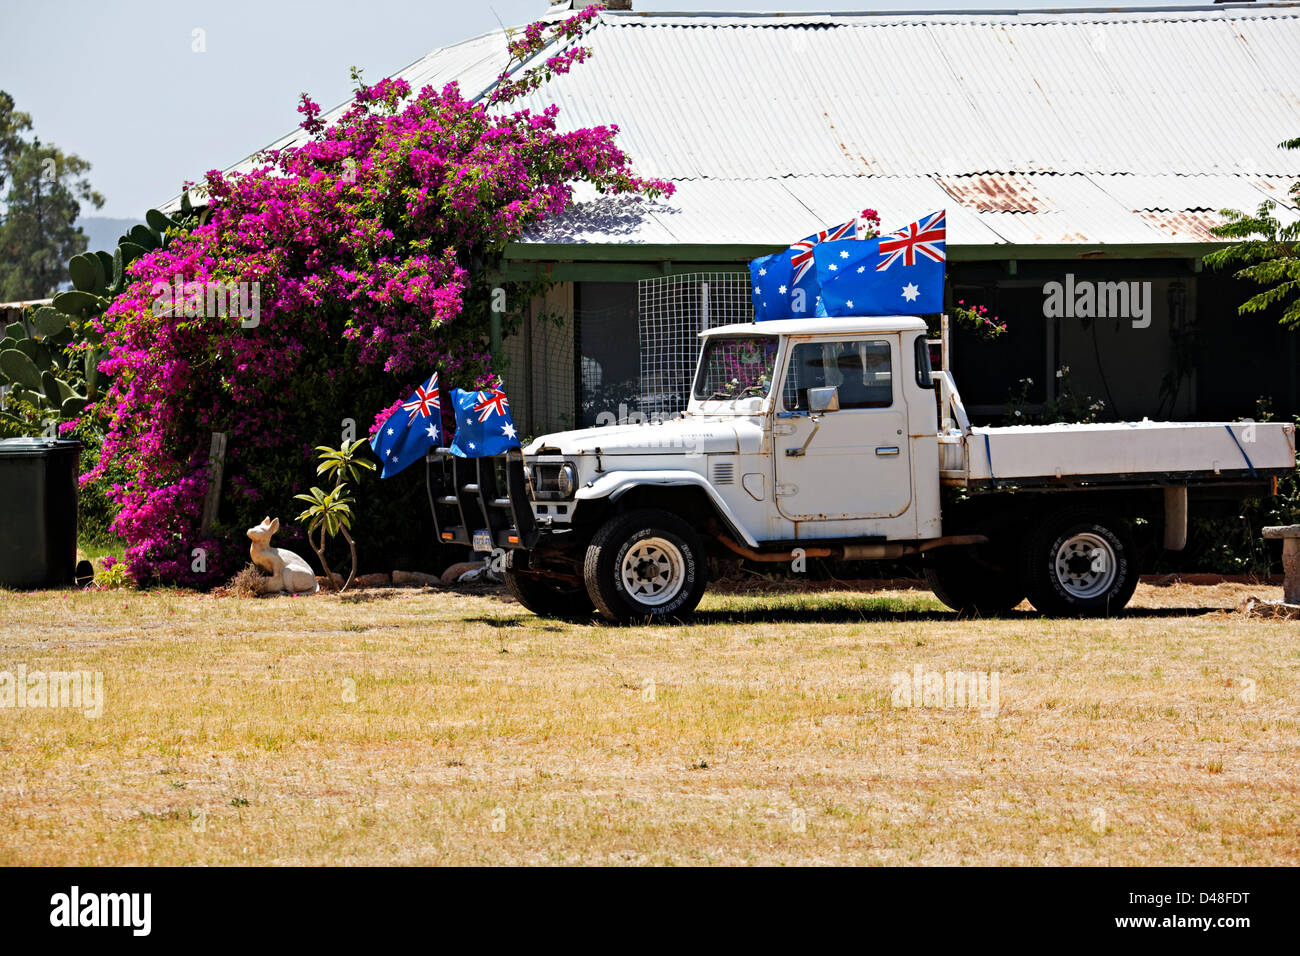 Australian Flags on a old motor vehicle in front of a country house Stock Photo